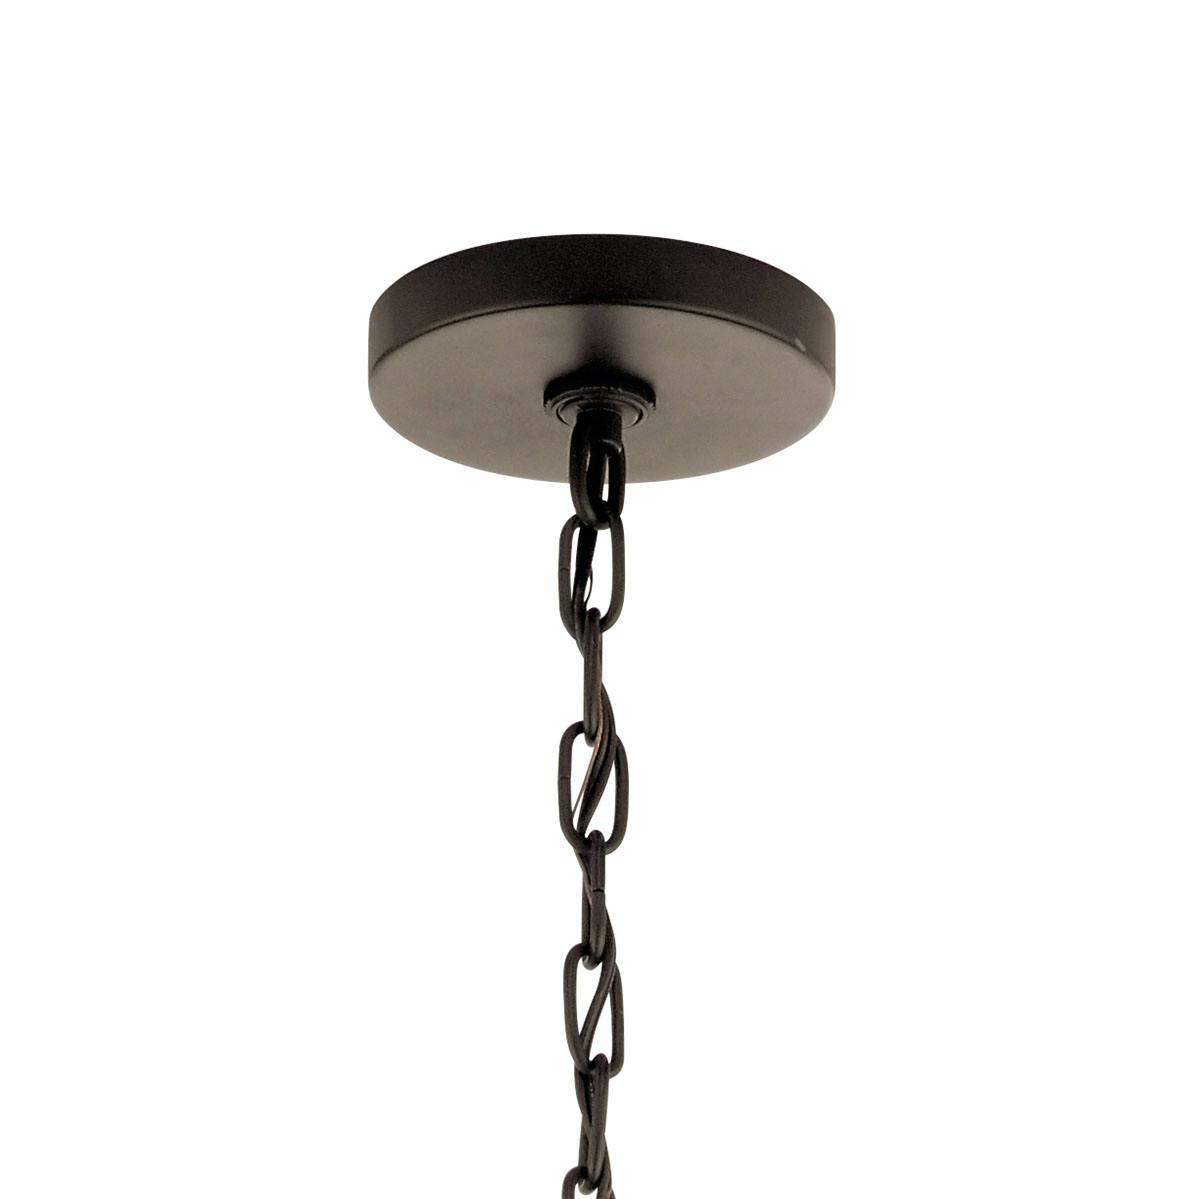 Canopy for the Ritson 3 Light Inverted Pendant Bronze on a white background